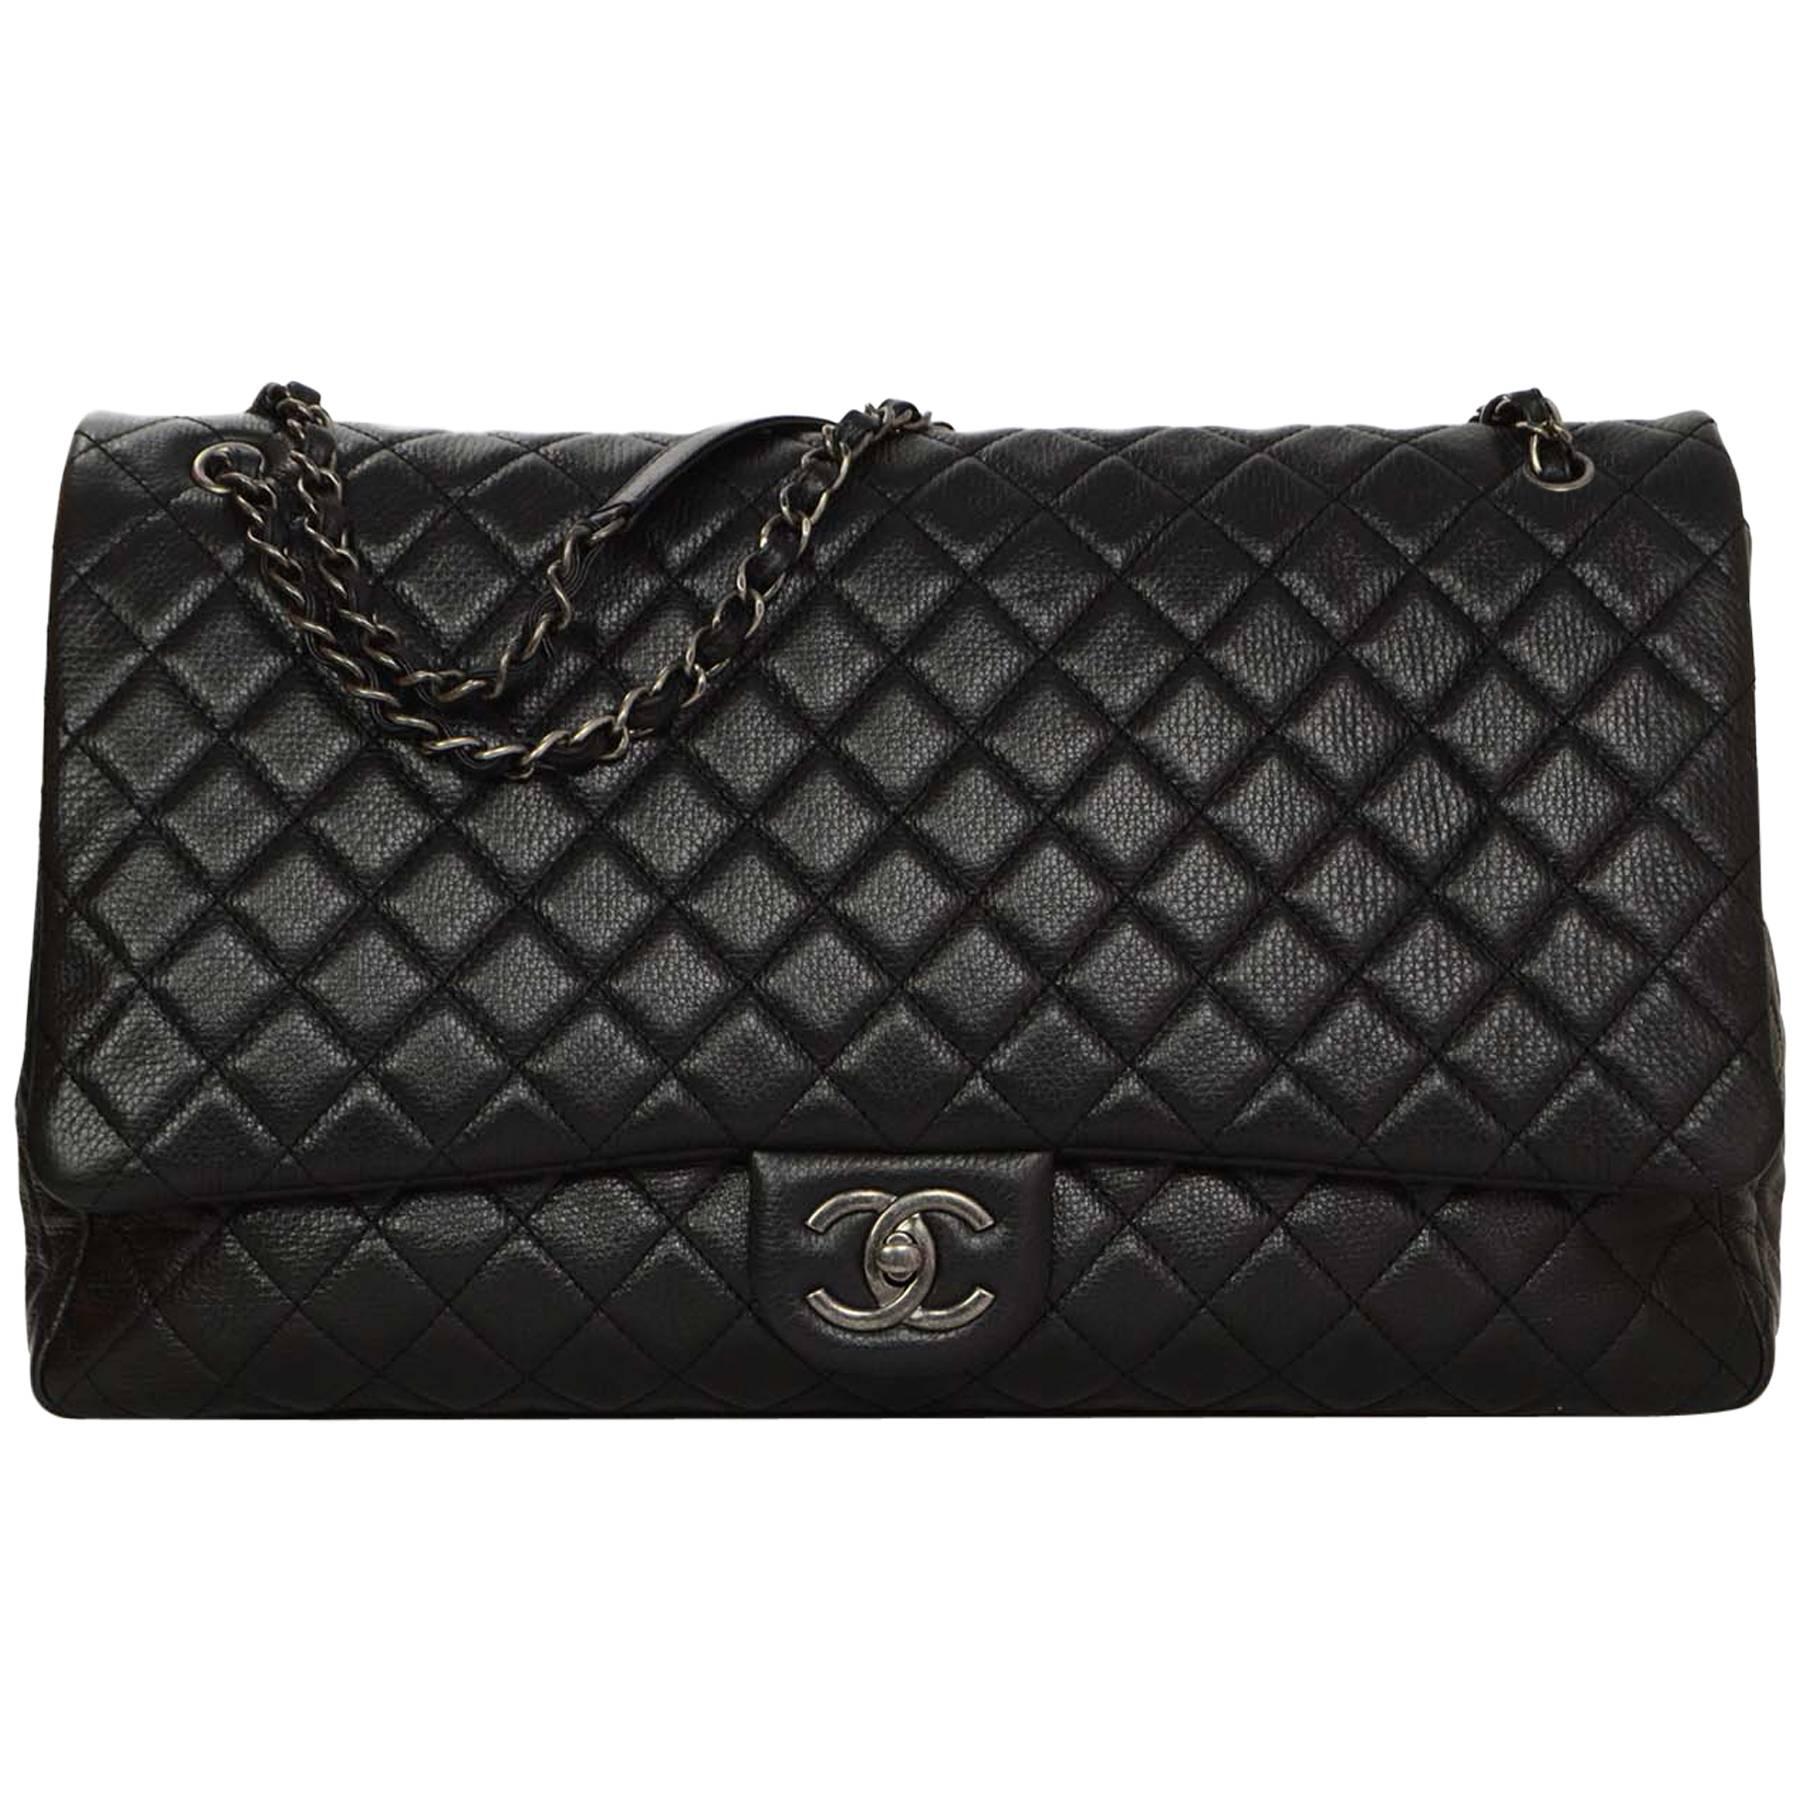 Chanel 2016 NEW w/ TAG Black Leather Quilted XL Flap Bag